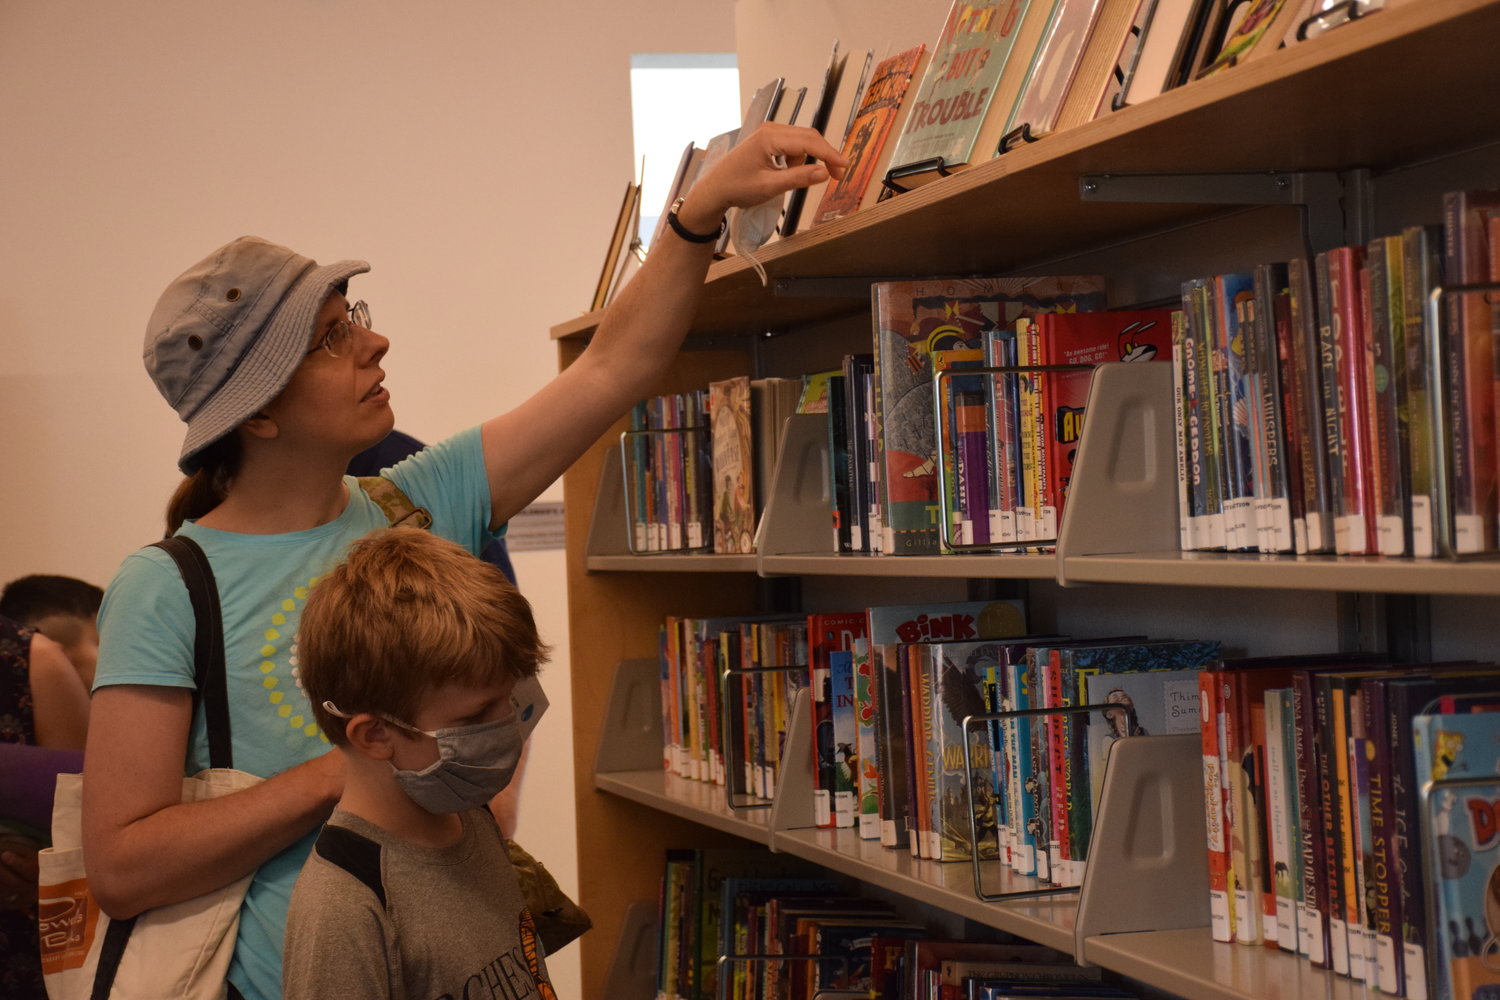 Margaret Christensen and her nephew, Finn, look through the children’s section of the Ridgefield Community Library during its grand opening on July 9.